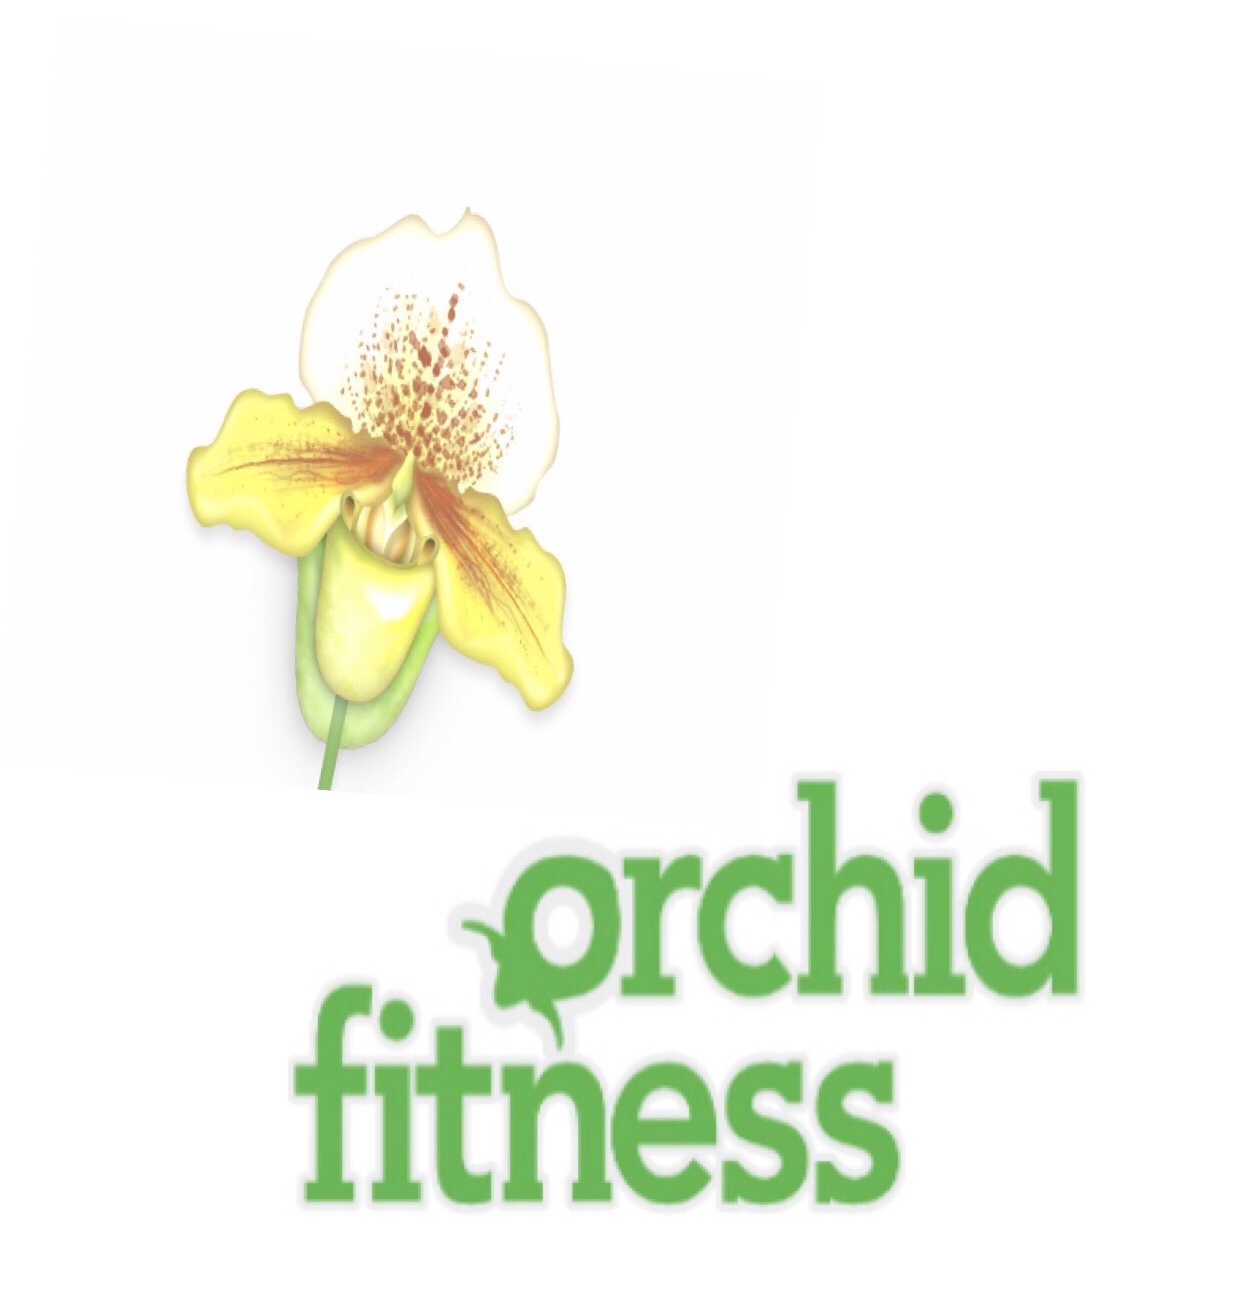 Orchid fitness Pilates